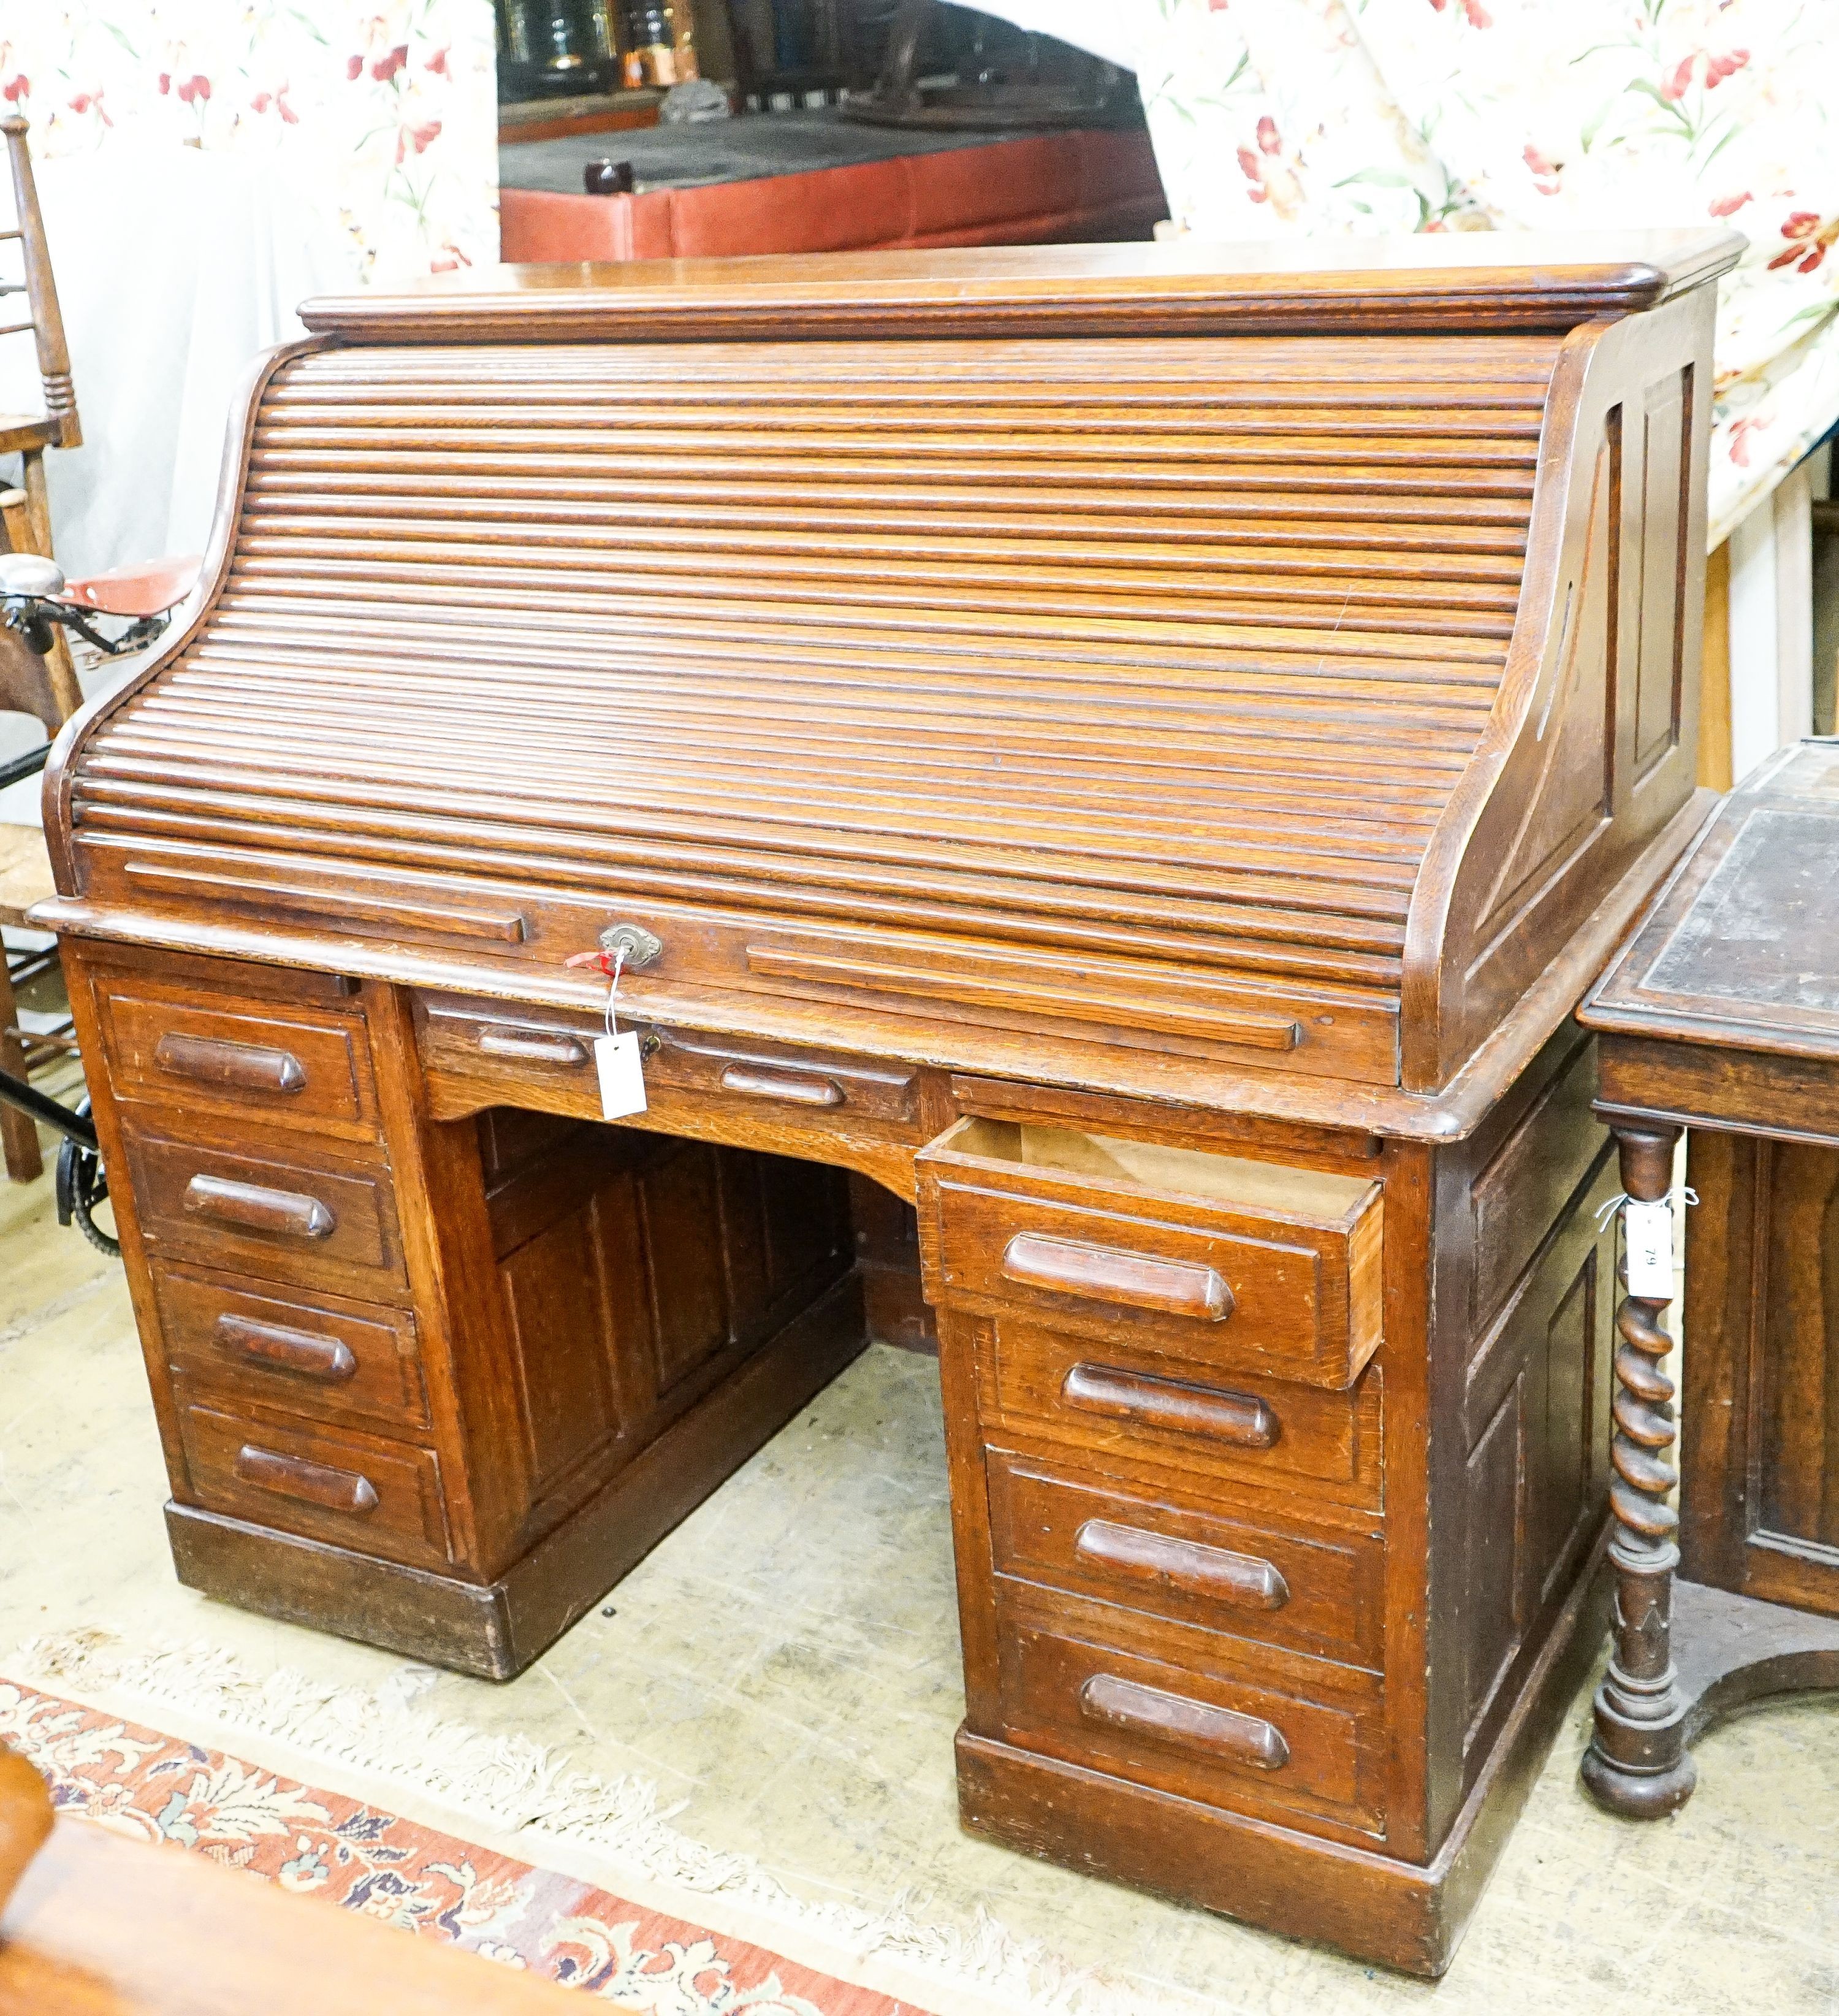 An early 20th century oak roll top desk with 'S' shape tambour, width 140cm, depth 80cm, height 128cm